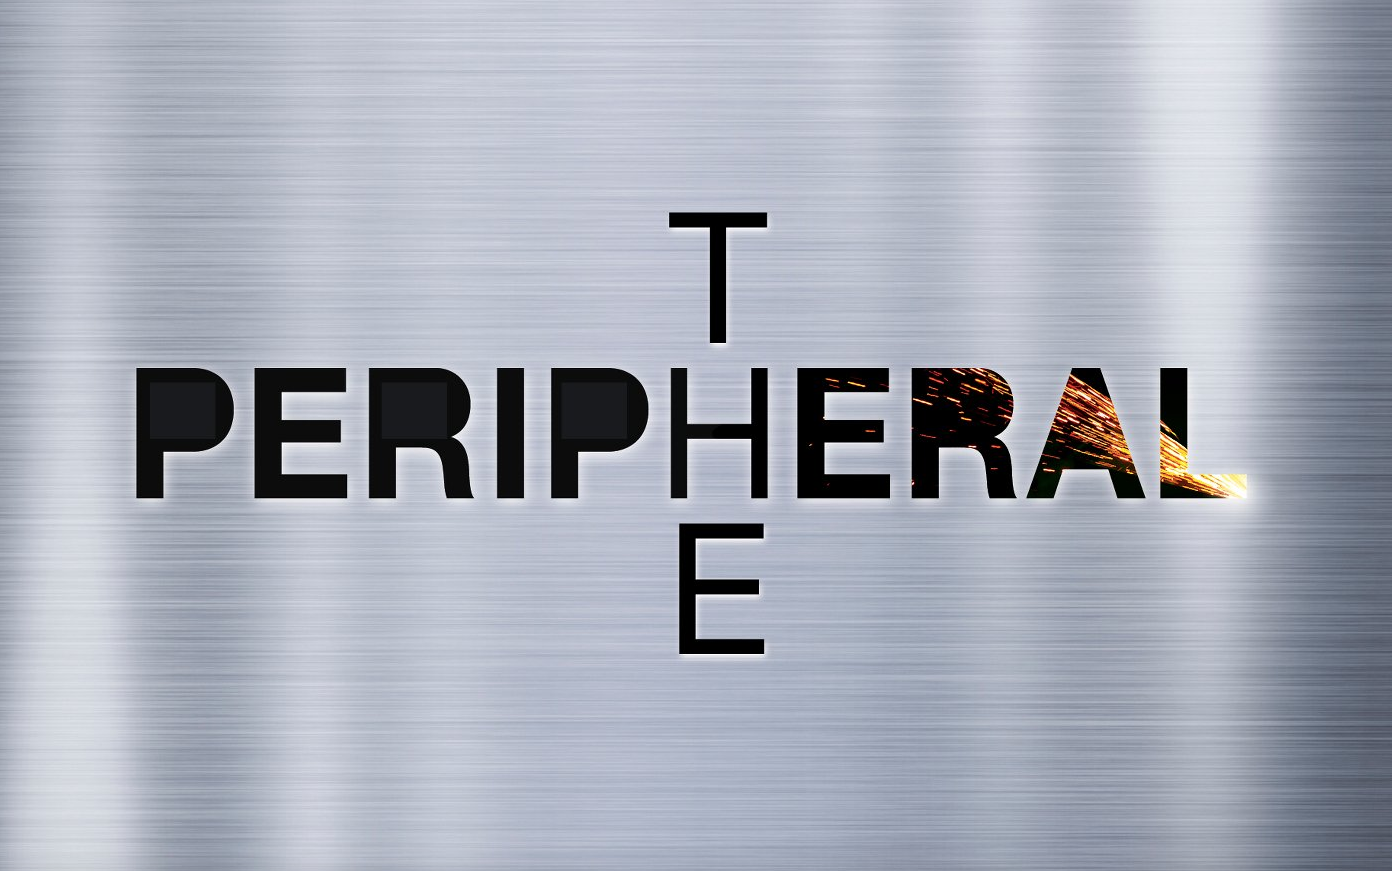 William Gibson’s The Peripheral TV series coming from Westworld team and Vincenzo Natali